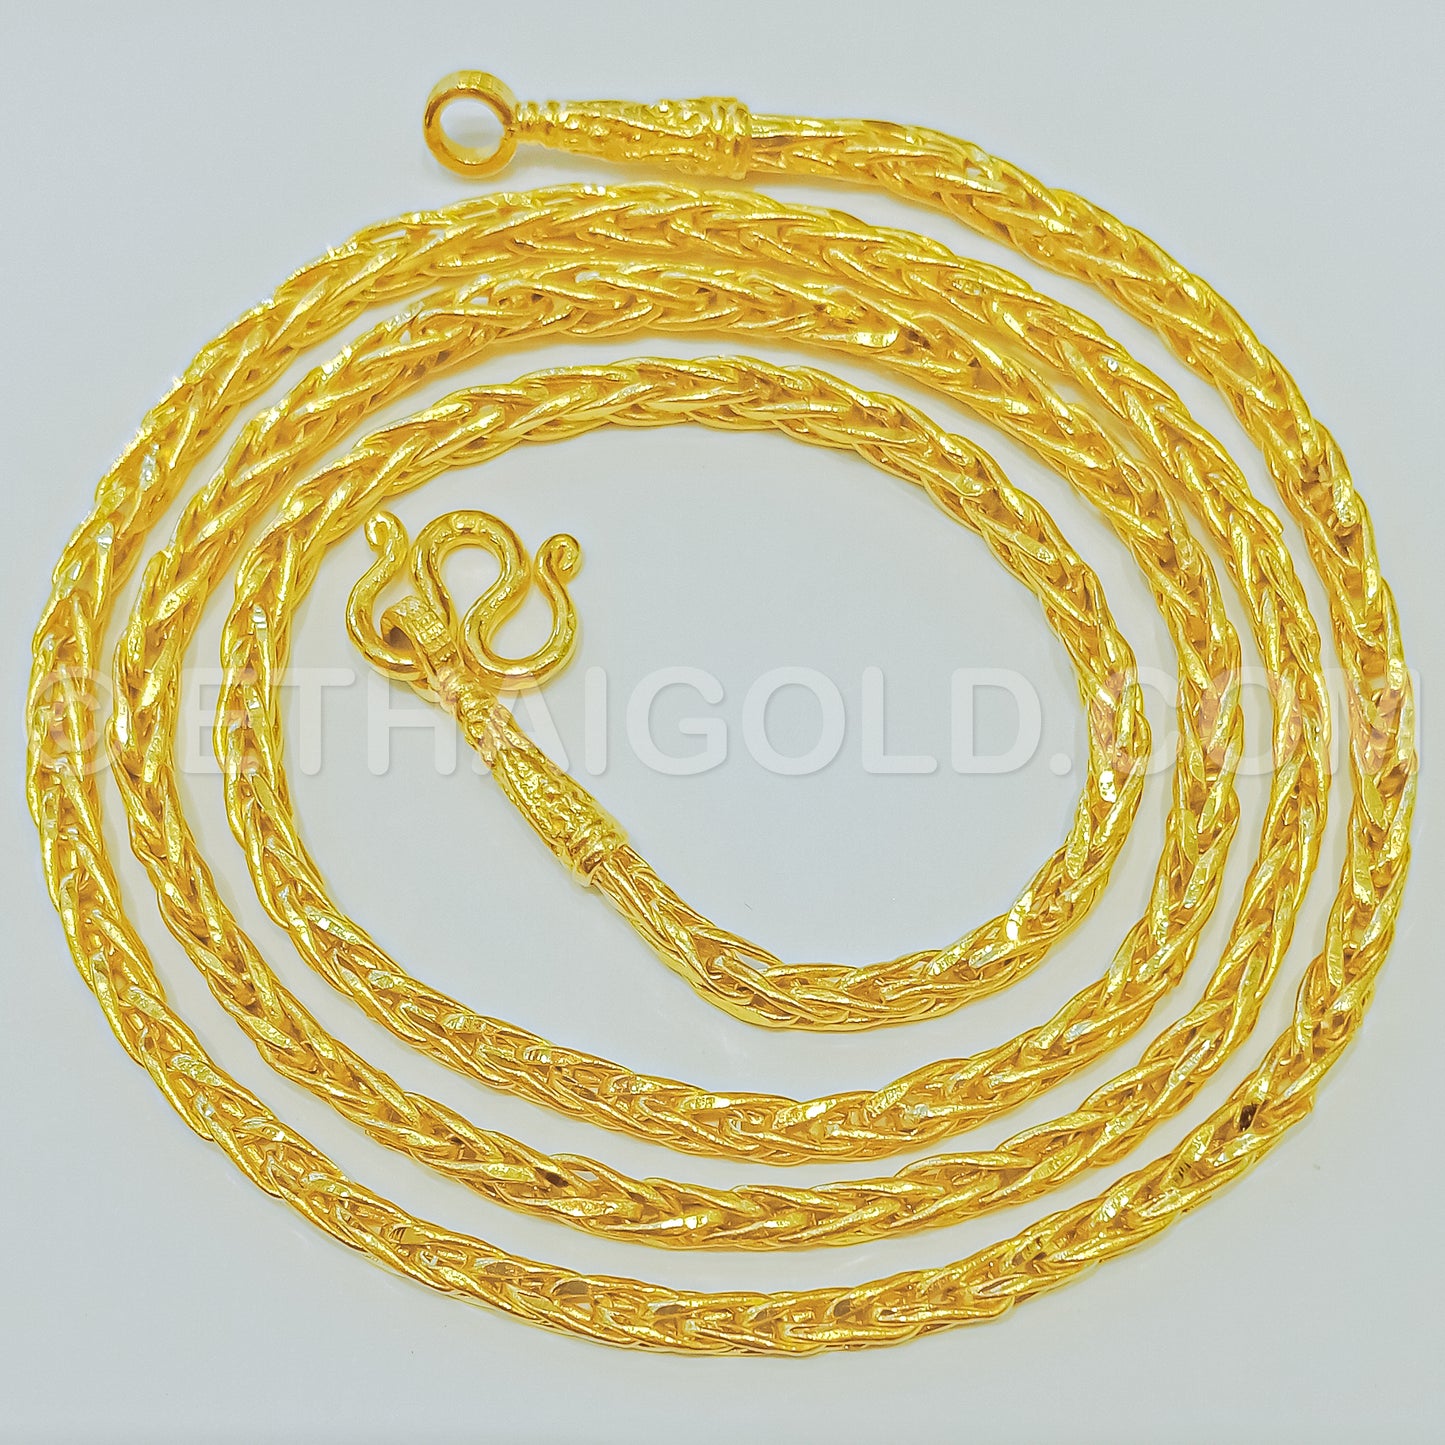 2 BAHT POLISHED DIAMOND-CUT HOLLOW SQUARE WHEAT CHAIN NECKLACE IN 23K GOLD (ID: N1402B)